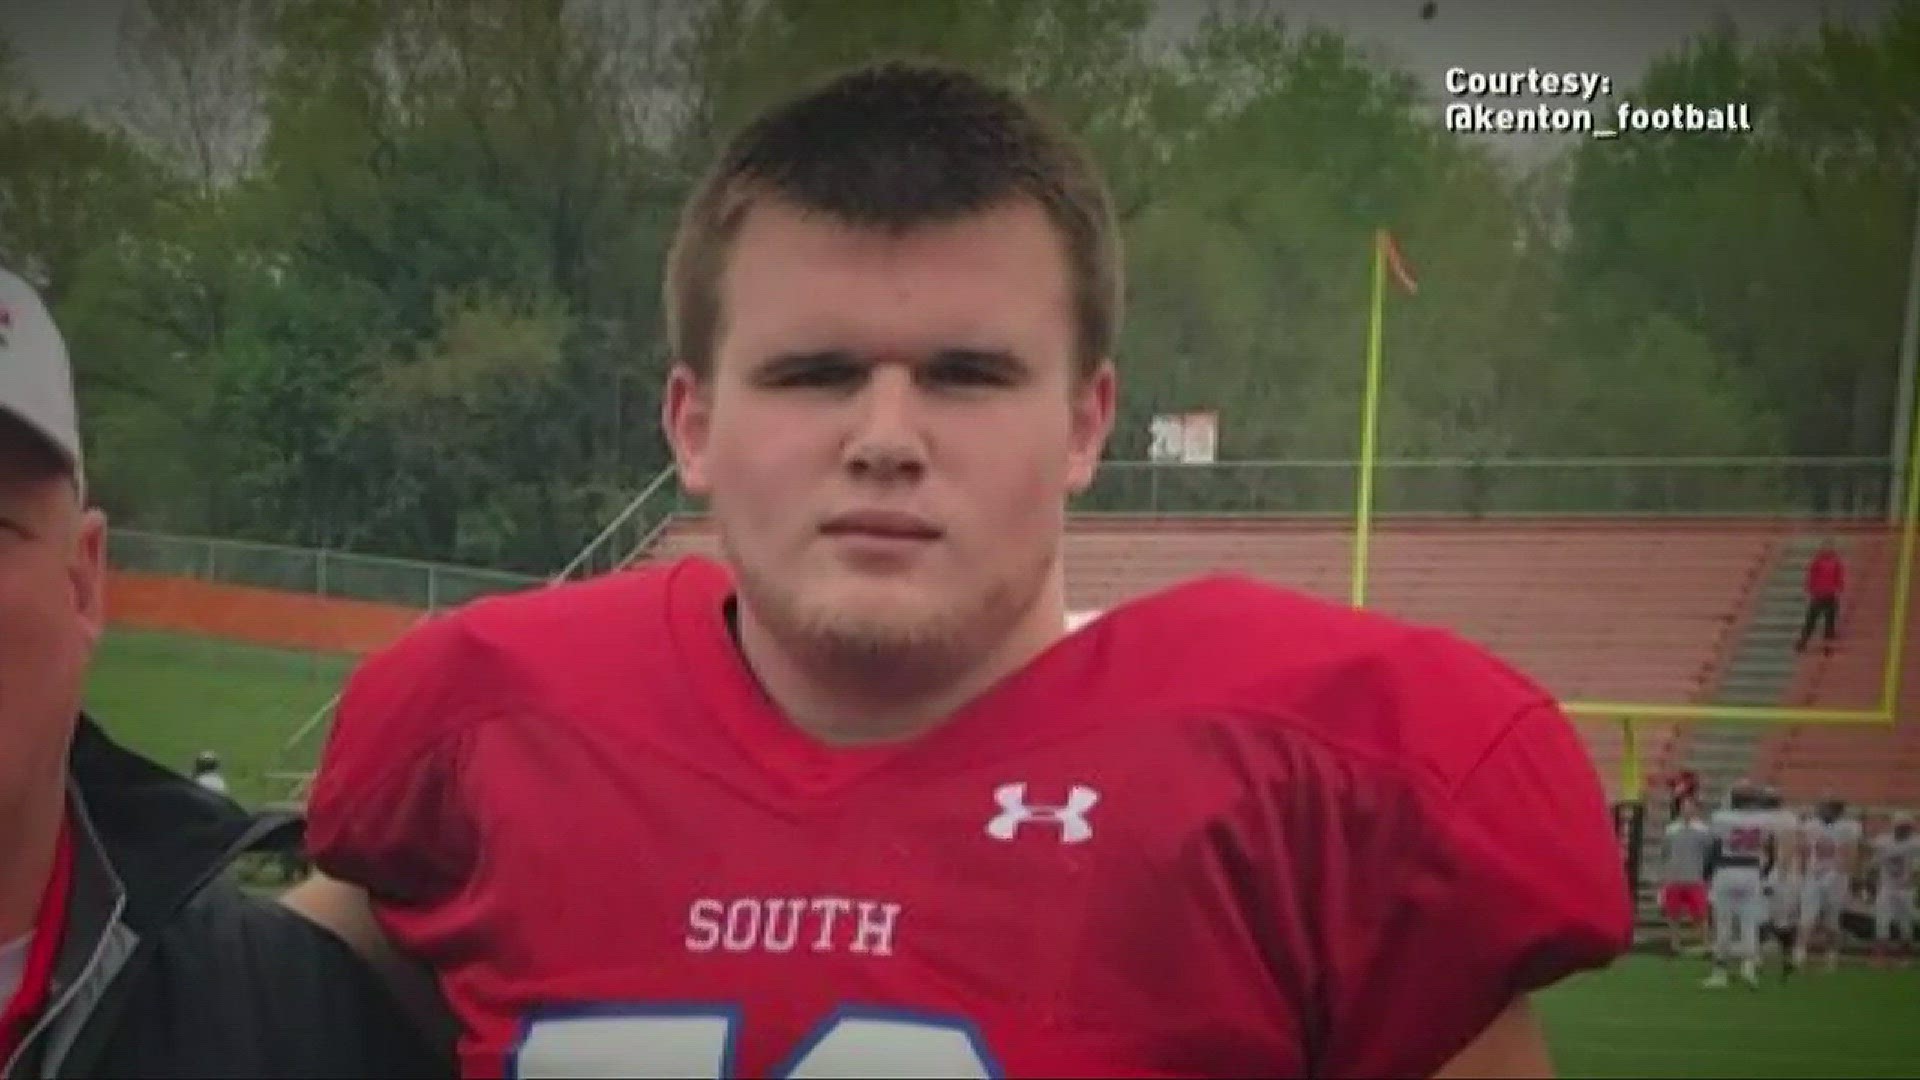 Cause of death of Kent State football player is exertional heat stroke